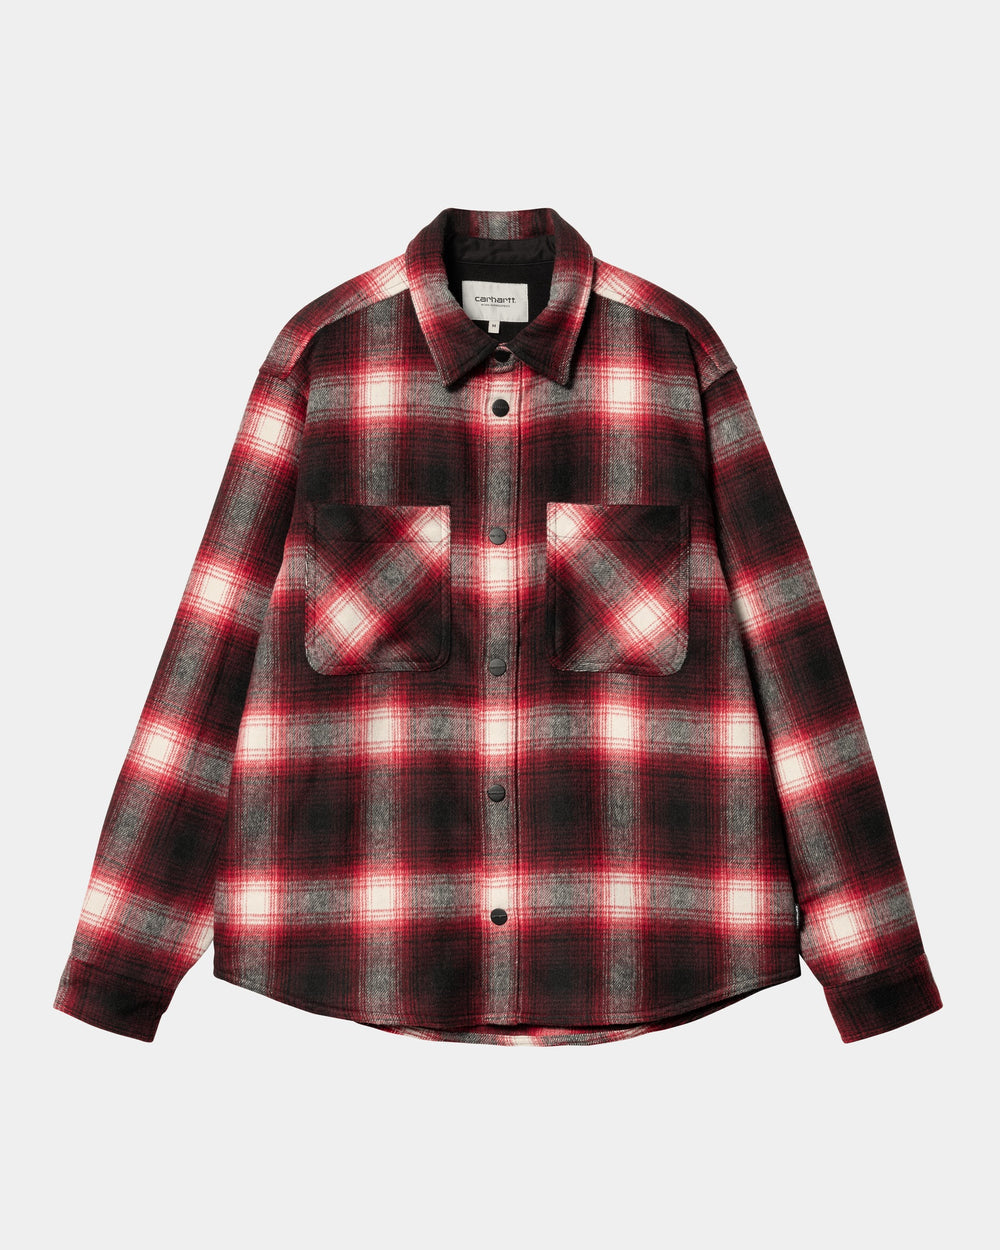 Carhartt WIP - CAHARTT WIP MOREAU CHECK SHIRT JACKET IN CHERRY - Rent With Thred